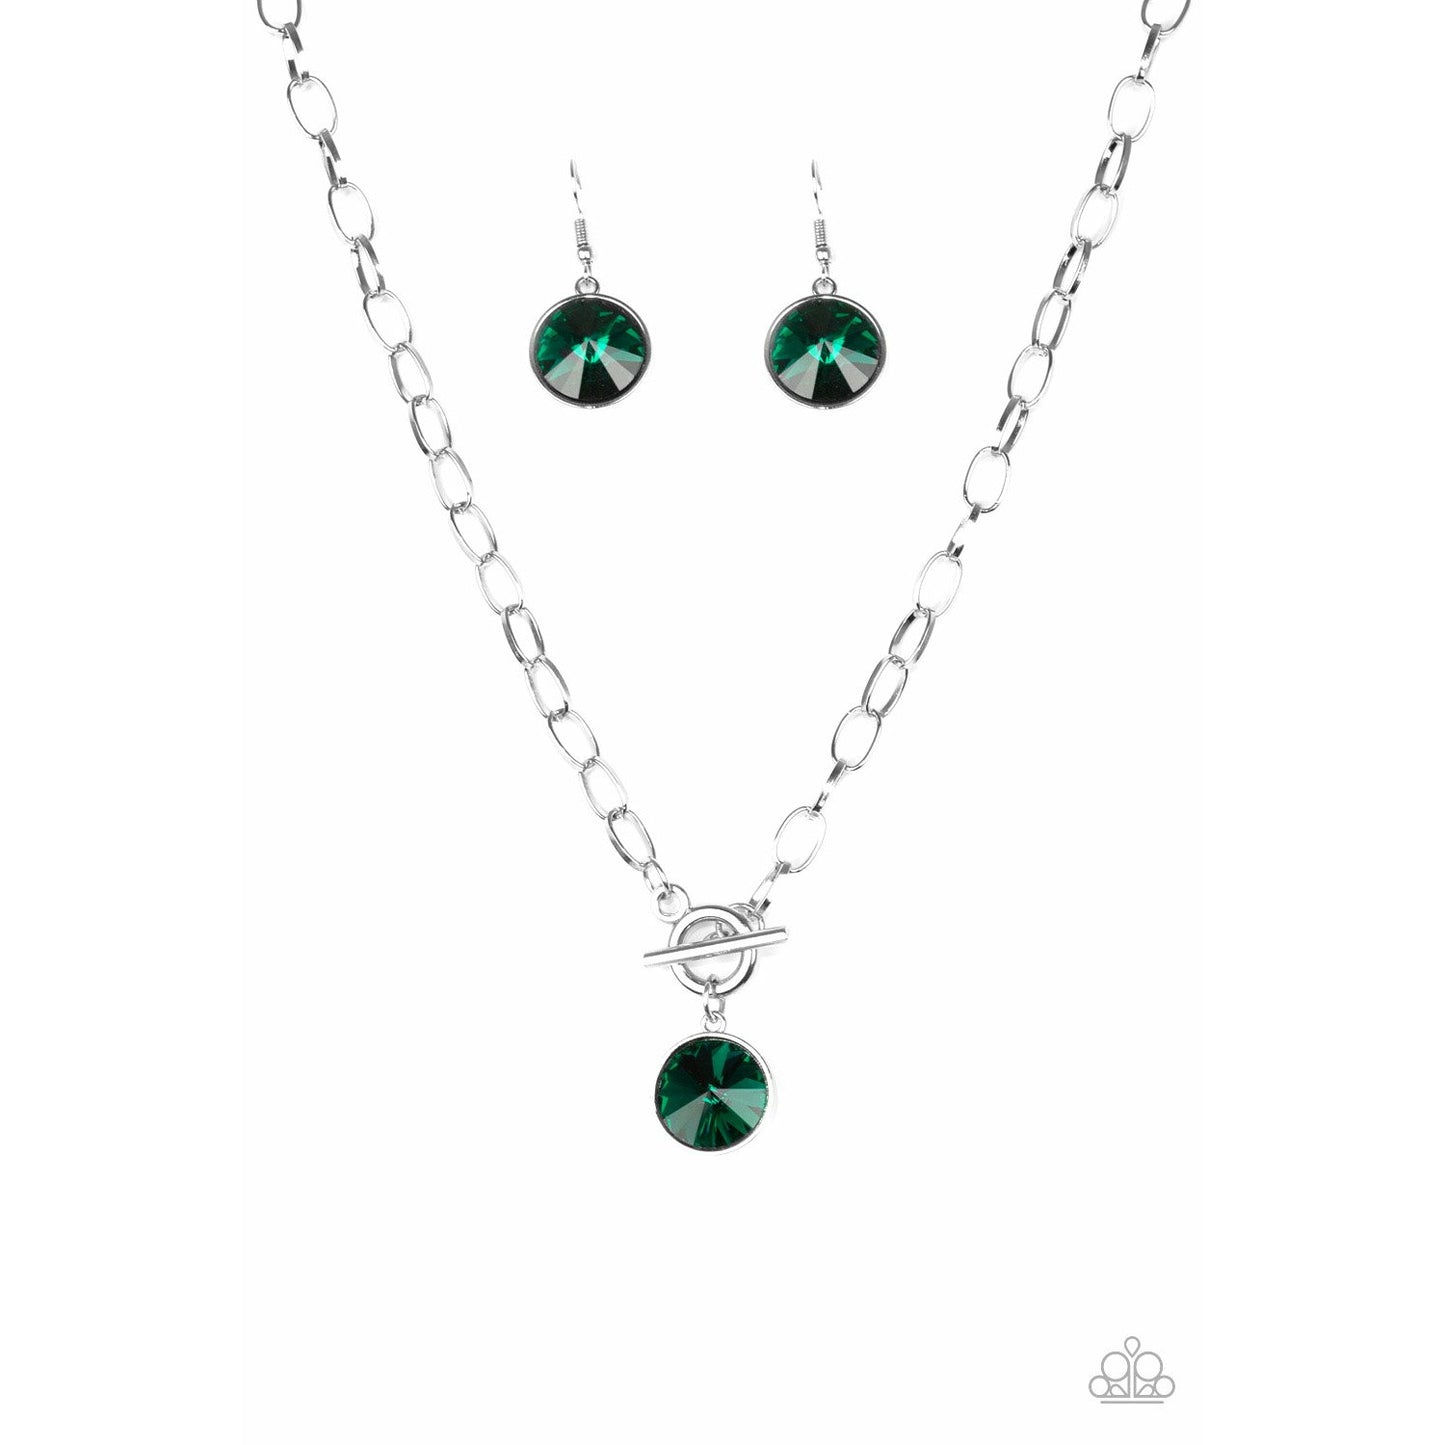 She Sparkles On - Green neacklace